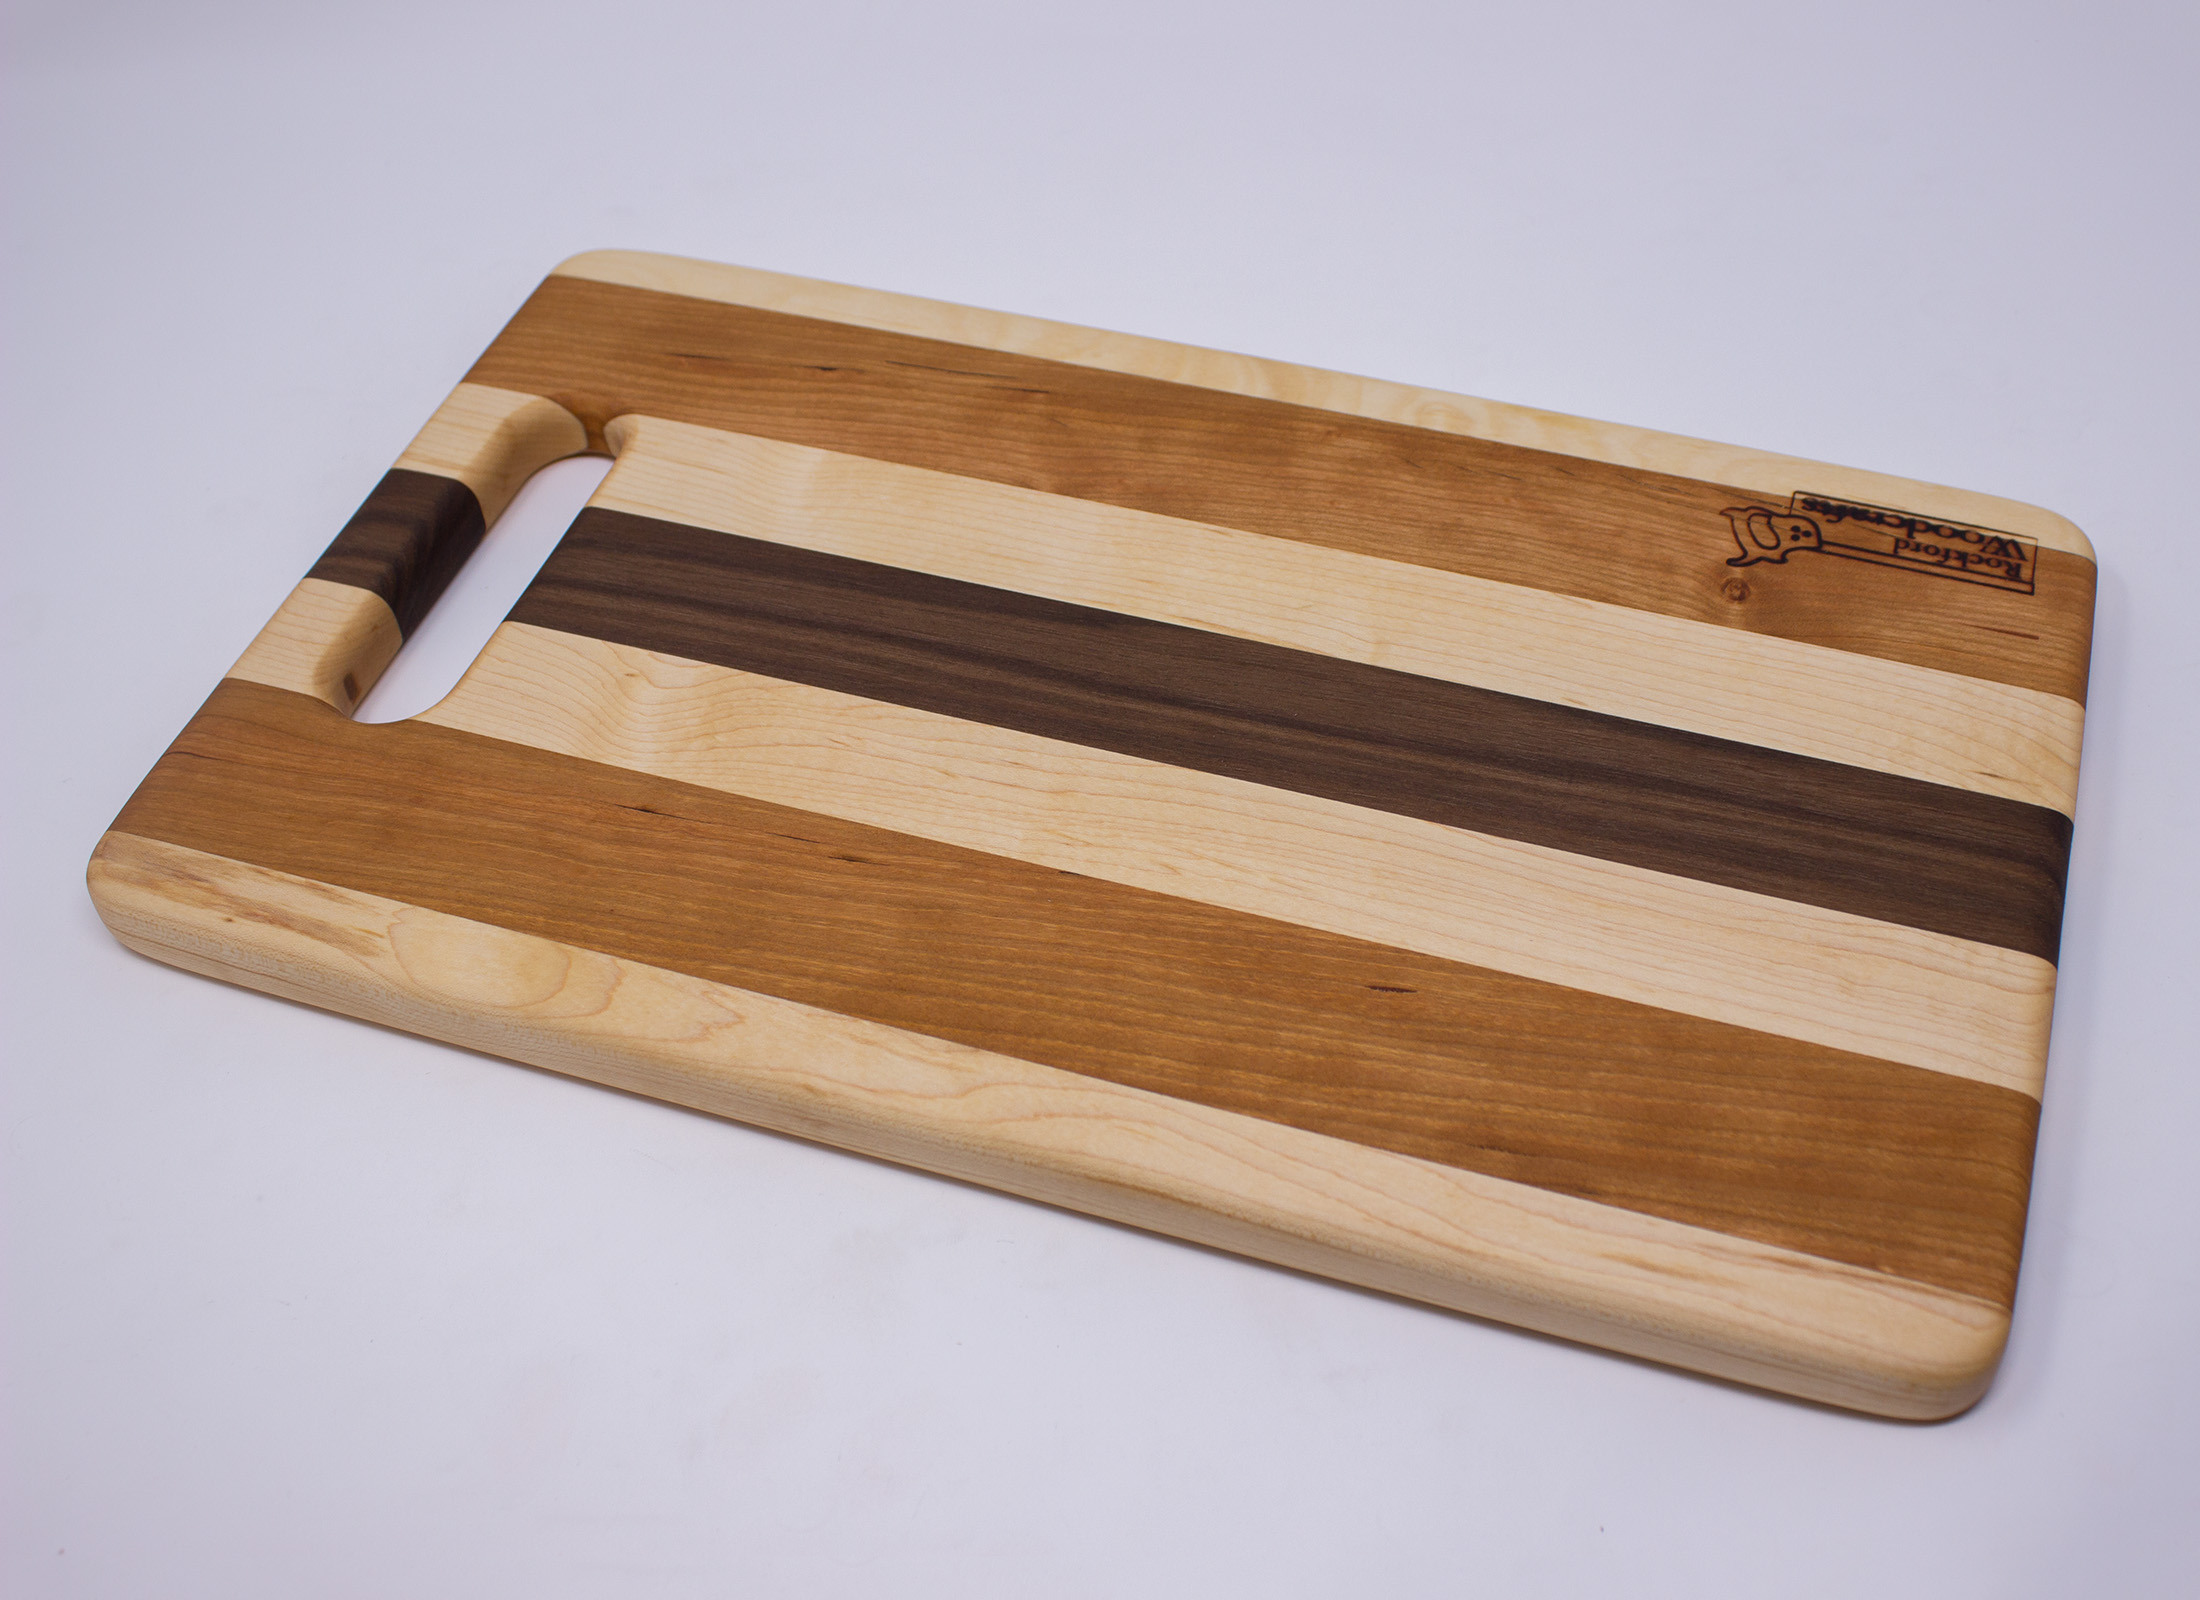 https://www.rockfordwoodcrafts.com/wp-content/uploads/Maple-Cherry-and-Walnut-Cutting-Board-with-Handle-Back-Angled.jpg